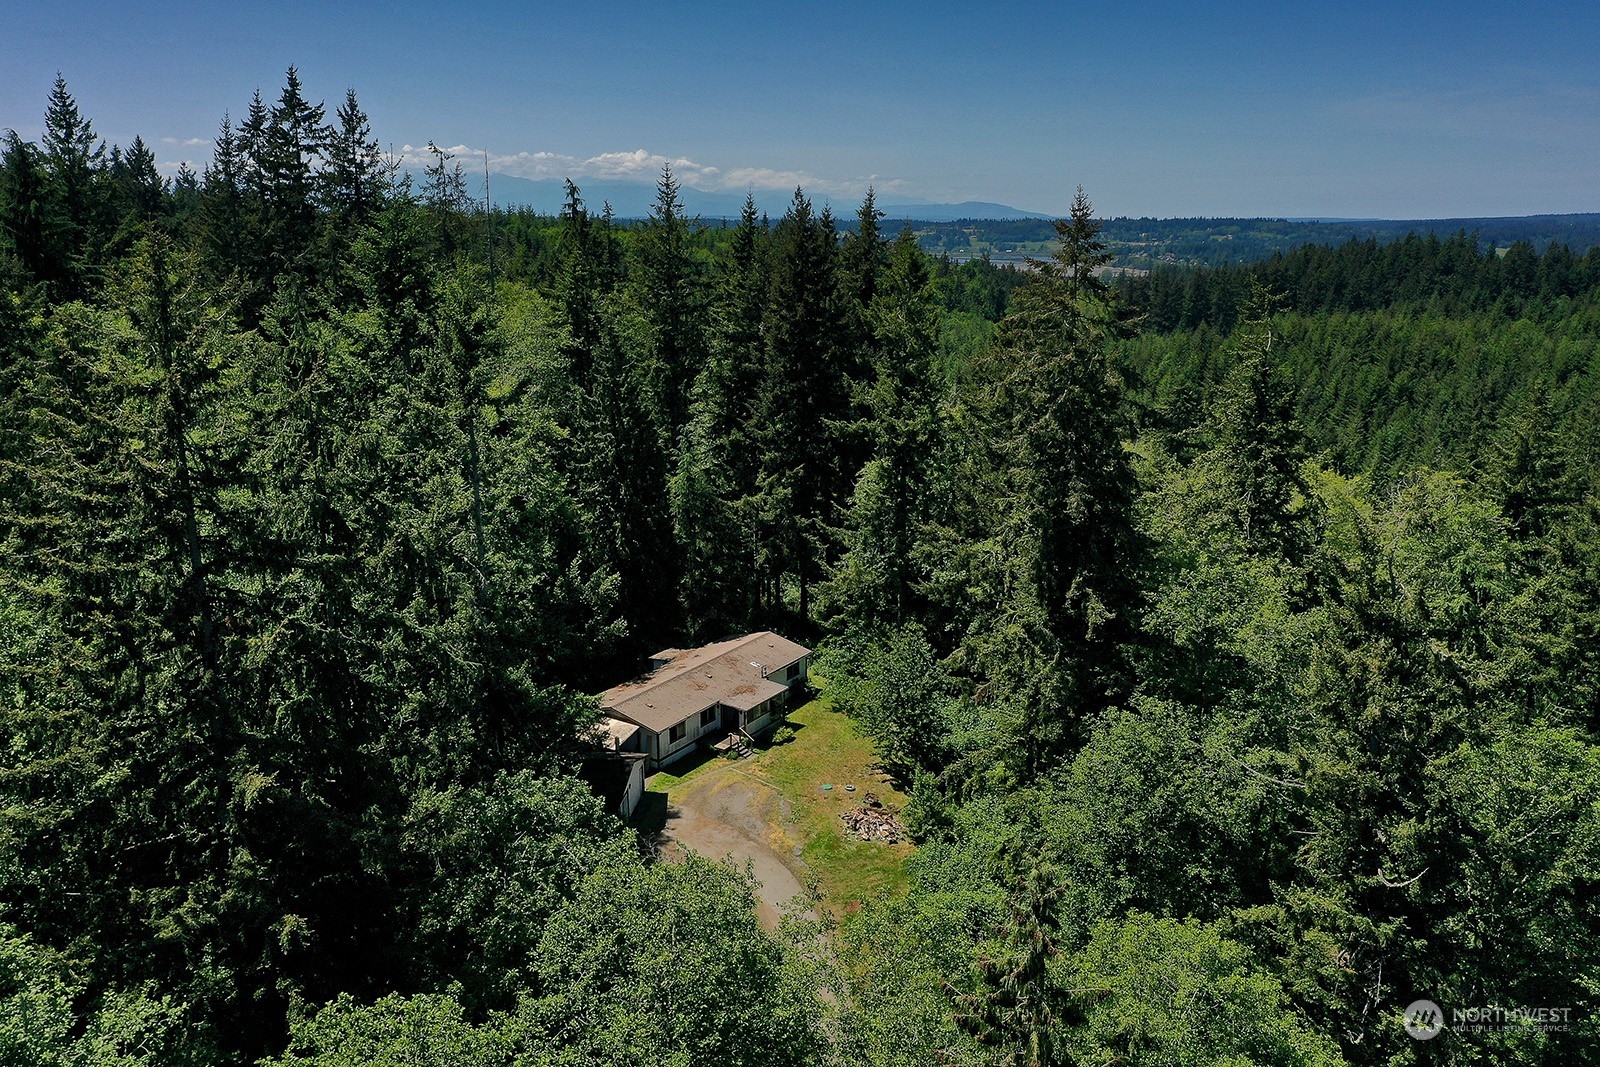 an aerial view of a house with lots of trees